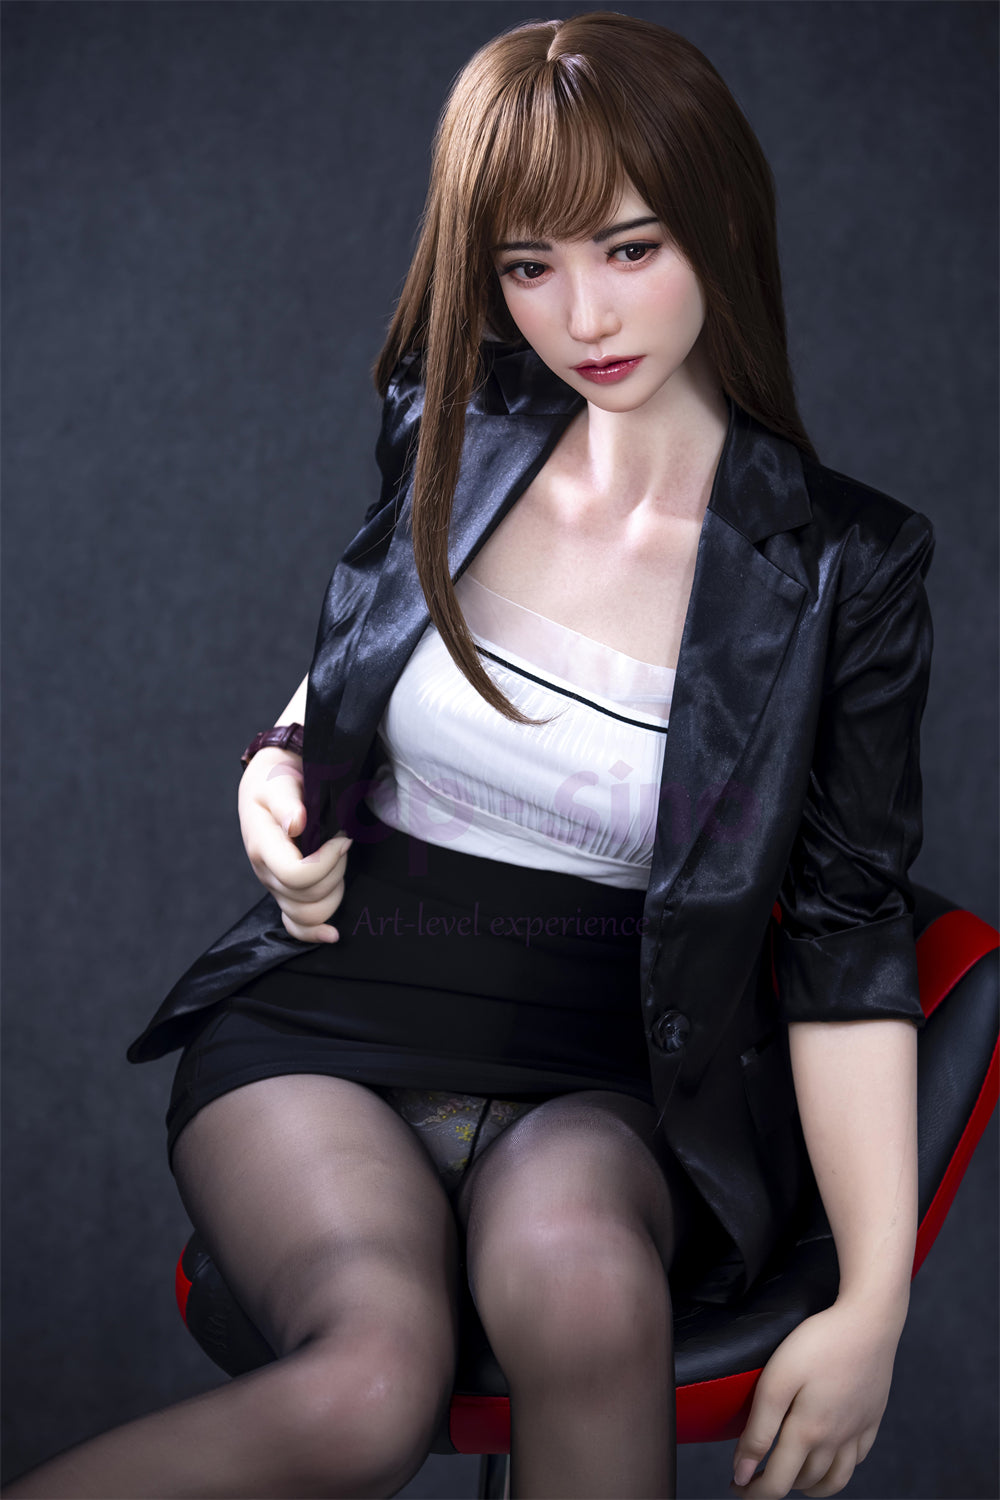 Top Sino 158 cm B Platinum Silicone - Mimei | Buy Sex Dolls at DOLLS ACTUALLY